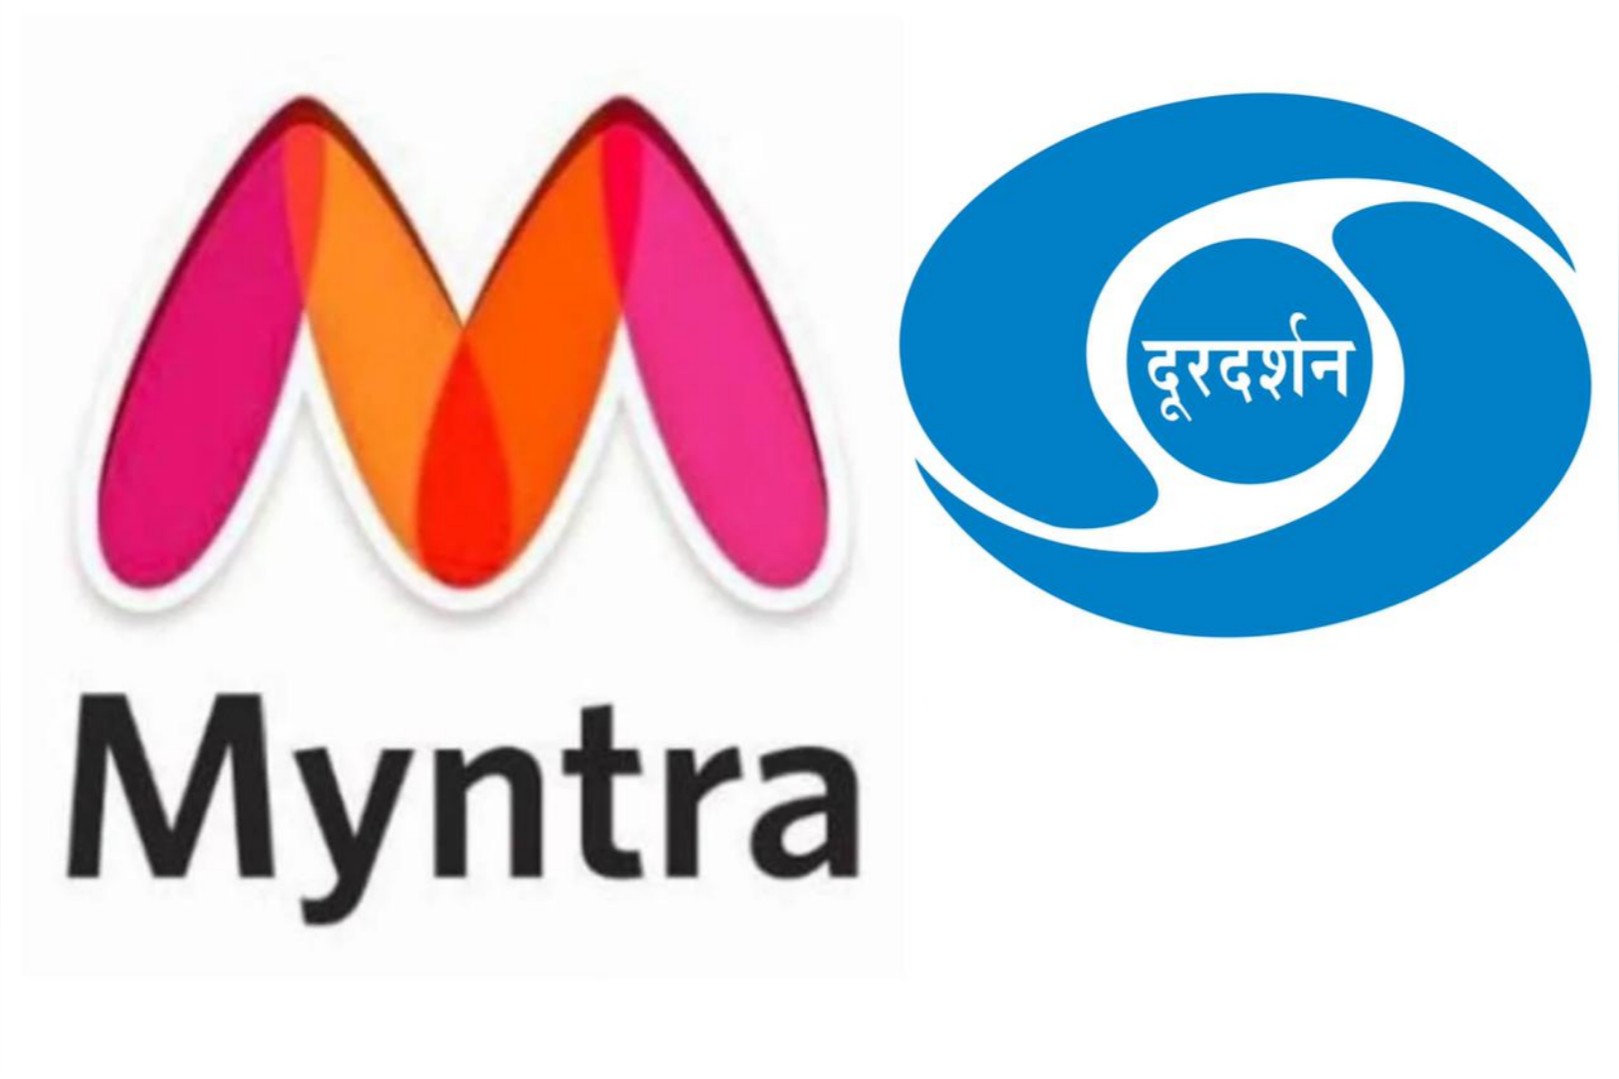 After E-commerce Brand Myntra, Doordarshan To Replace Its Existing Logo Following A Complaint That Claimed It Looks Like 69, A Sexual Position